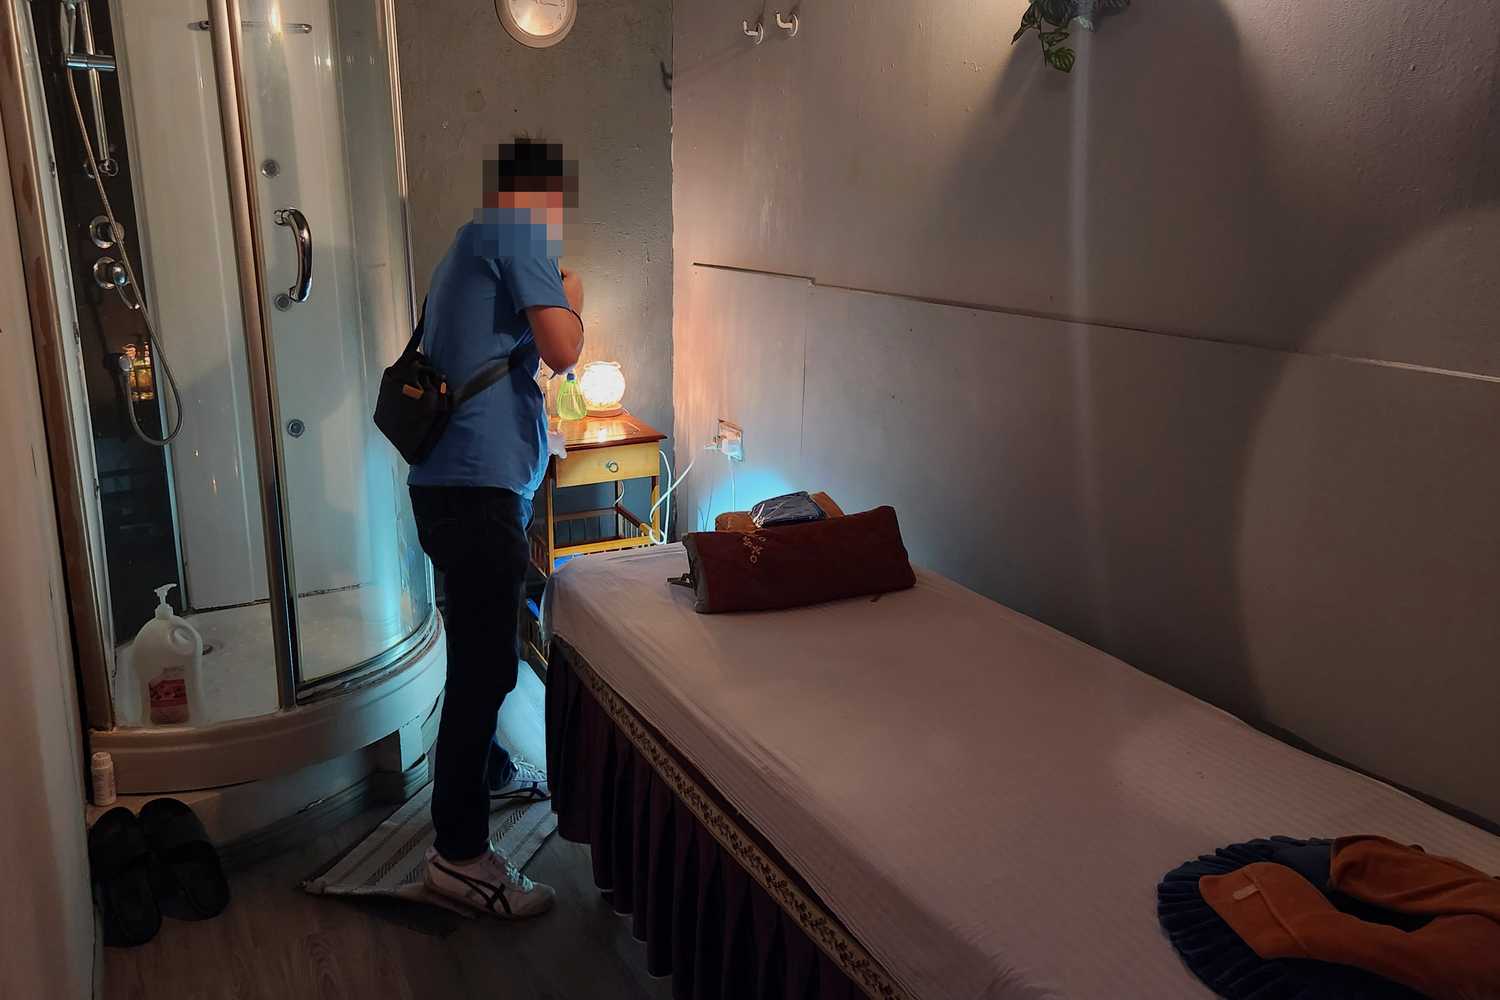 a police officer using his torchlight to check around the massage beds 